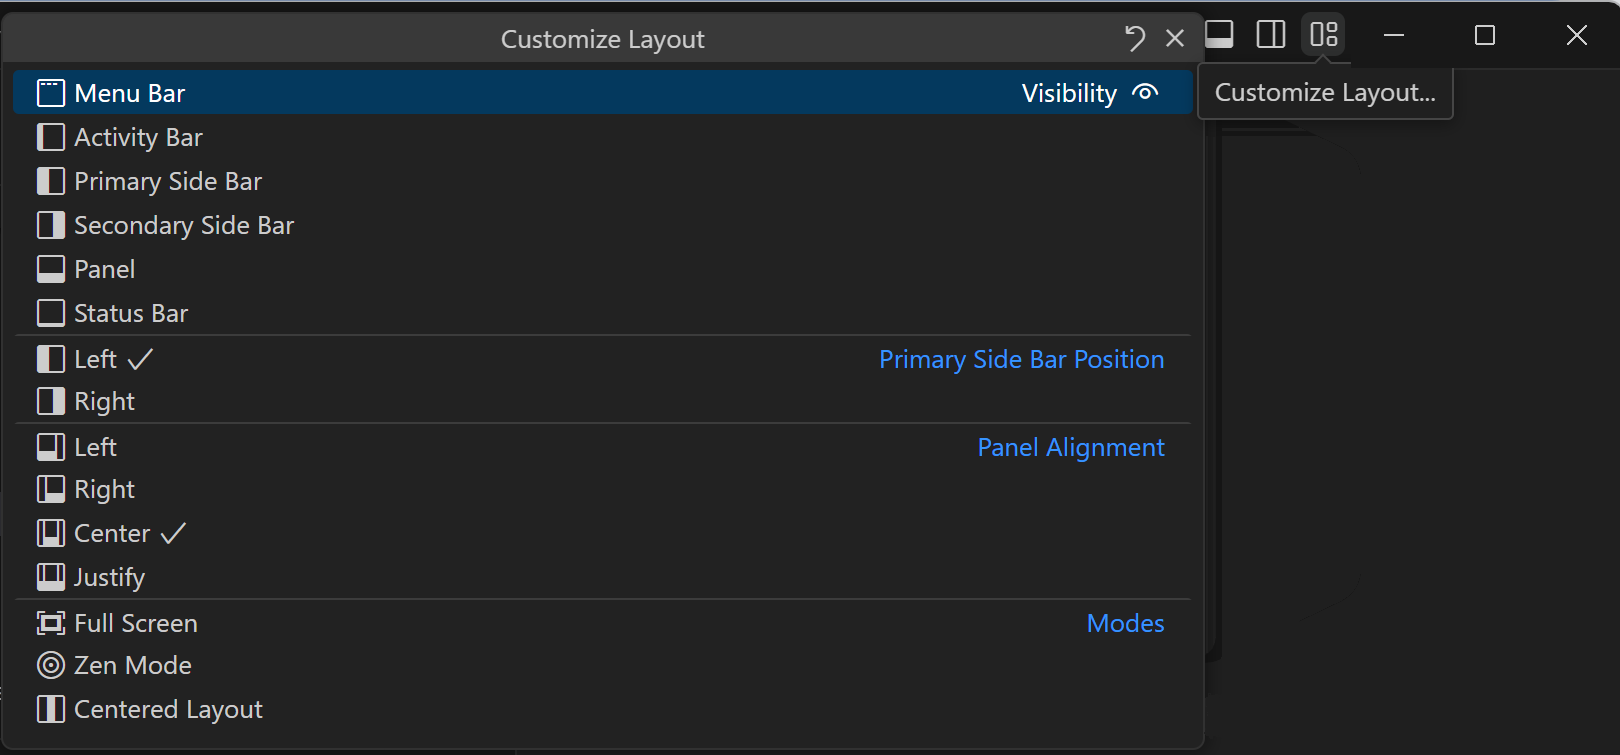 Customize Layout dropdown shown via the Customize Layout button in the title bar